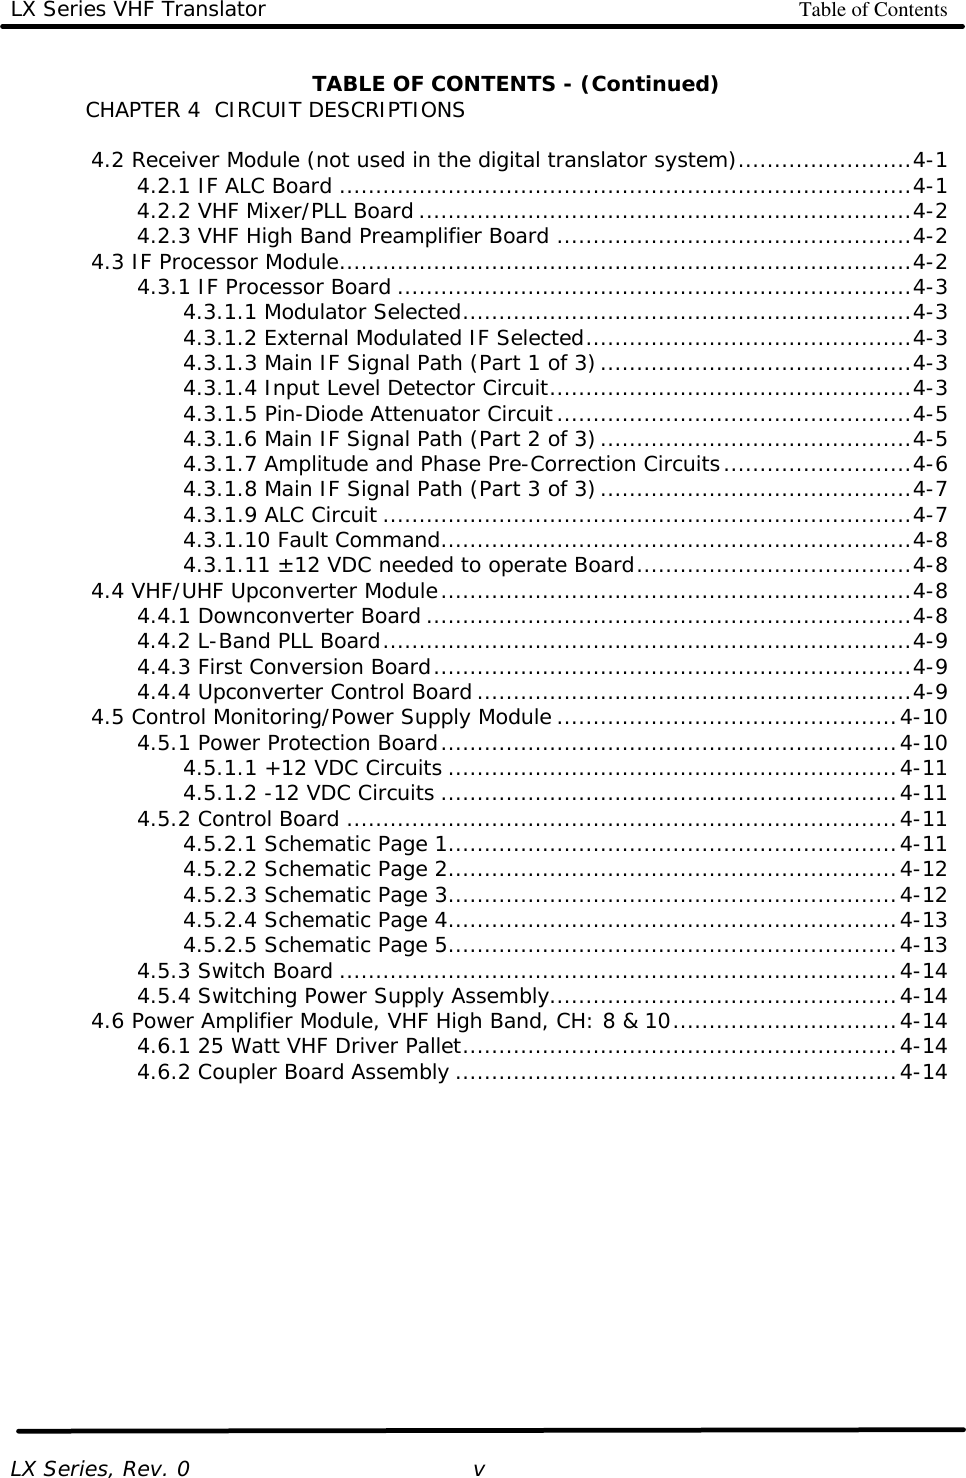 LX Series VHF Translator Table of Contents   LX Series, Rev. 0   v TABLE OF CONTENTS - (Continued) CHAPTER 4  CIRCUIT DESCRIPTIONS   4.2 Receiver Module (not used in the digital translator system)........................4-1     4.2.1 IF ALC Board ...............................................................................4-1     4.2.2 VHF Mixer/PLL Board ....................................................................4-2     4.2.3 VHF High Band Preamplifier Board .................................................4-2  4.3 IF Processor Module...............................................................................4-2     4.3.1 IF Processor Board .......................................................................4-3     4.3.1.1 Modulator Selected..............................................................4-3     4.3.1.2 External Modulated IF Selected.............................................4-3     4.3.1.3 Main IF Signal Path (Part 1 of 3)...........................................4-3     4.3.1.4 Input Level Detector Circuit..................................................4-3     4.3.1.5 Pin-Diode Attenuator Circuit.................................................4-5     4.3.1.6 Main IF Signal Path (Part 2 of 3)...........................................4-5     4.3.1.7 Amplitude and Phase Pre-Correction Circuits..........................4-6     4.3.1.8 Main IF Signal Path (Part 3 of 3)...........................................4-7     4.3.1.9 ALC Circuit .........................................................................4-7     4.3.1.10 Fault Command.................................................................4-8     4.3.1.11 ±12 VDC needed to operate Board......................................4-8  4.4 VHF/UHF Upconverter Module.................................................................4-8     4.4.1 Downconverter Board ...................................................................4-8     4.4.2 L-Band PLL Board.........................................................................4-9     4.4.3 First Conversion Board..................................................................4-9     4.4.4 Upconverter Control Board ............................................................4-9  4.5 Control Monitoring/Power Supply Module ...............................................4-10     4.5.1 Power Protection Board...............................................................4-10     4.5.1.1 +12 VDC Circuits ..............................................................4-11     4.5.1.2 -12 VDC Circuits ...............................................................4-11     4.5.2 Control Board ............................................................................4-11     4.5.2.1 Schematic Page 1..............................................................4-11     4.5.2.2 Schematic Page 2..............................................................4-12     4.5.2.3 Schematic Page 3..............................................................4-12     4.5.2.4 Schematic Page 4..............................................................4-13     4.5.2.5 Schematic Page 5..............................................................4-13     4.5.3 Switch Board .............................................................................4-14     4.5.4 Switching Power Supply Assembly................................................4-14  4.6 Power Amplifier Module, VHF High Band, CH: 8 &amp; 10...............................4-14     4.6.1 25 Watt VHF Driver Pallet............................................................4-14     4.6.2 Coupler Board Assembly .............................................................4-14  